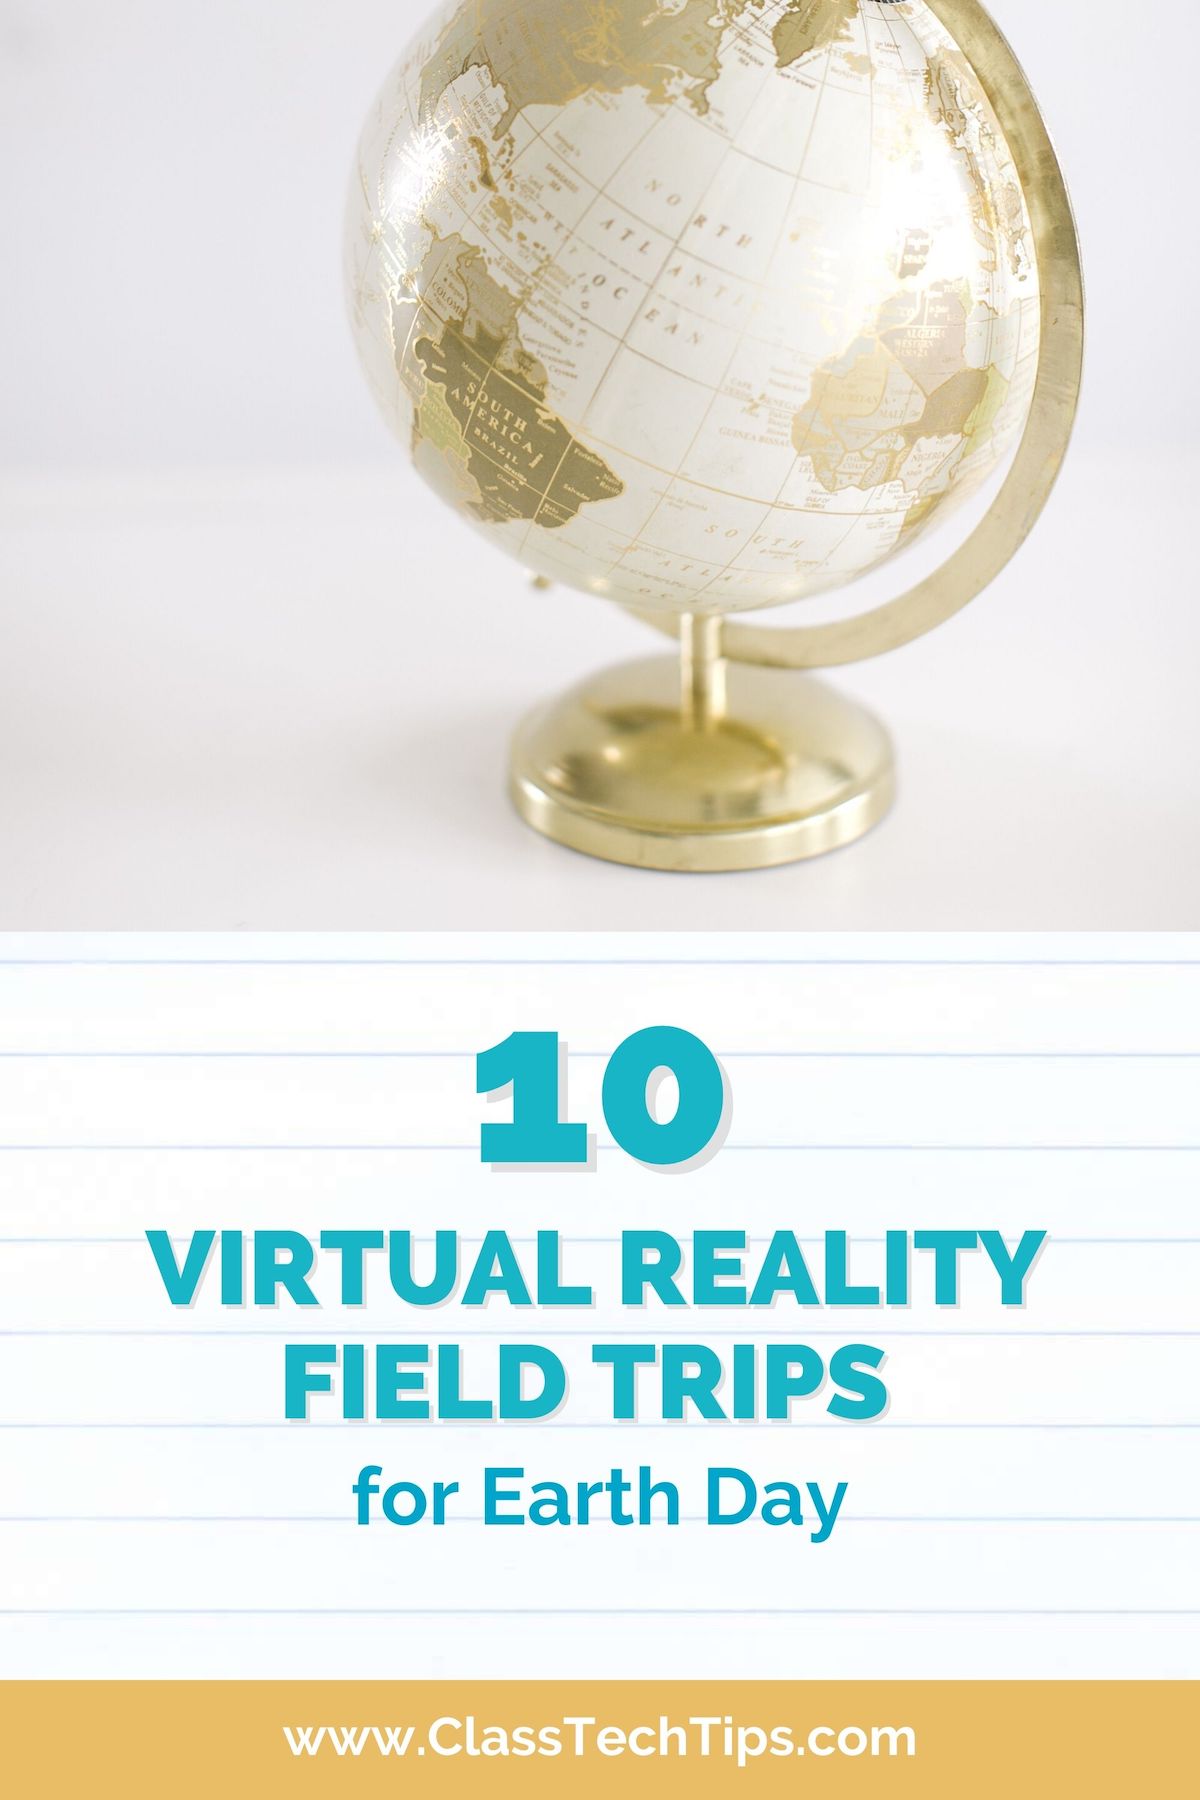 If you want to take students on a tour of our planet this April 22nd, try out these virtual reality field trips for Earth Day.